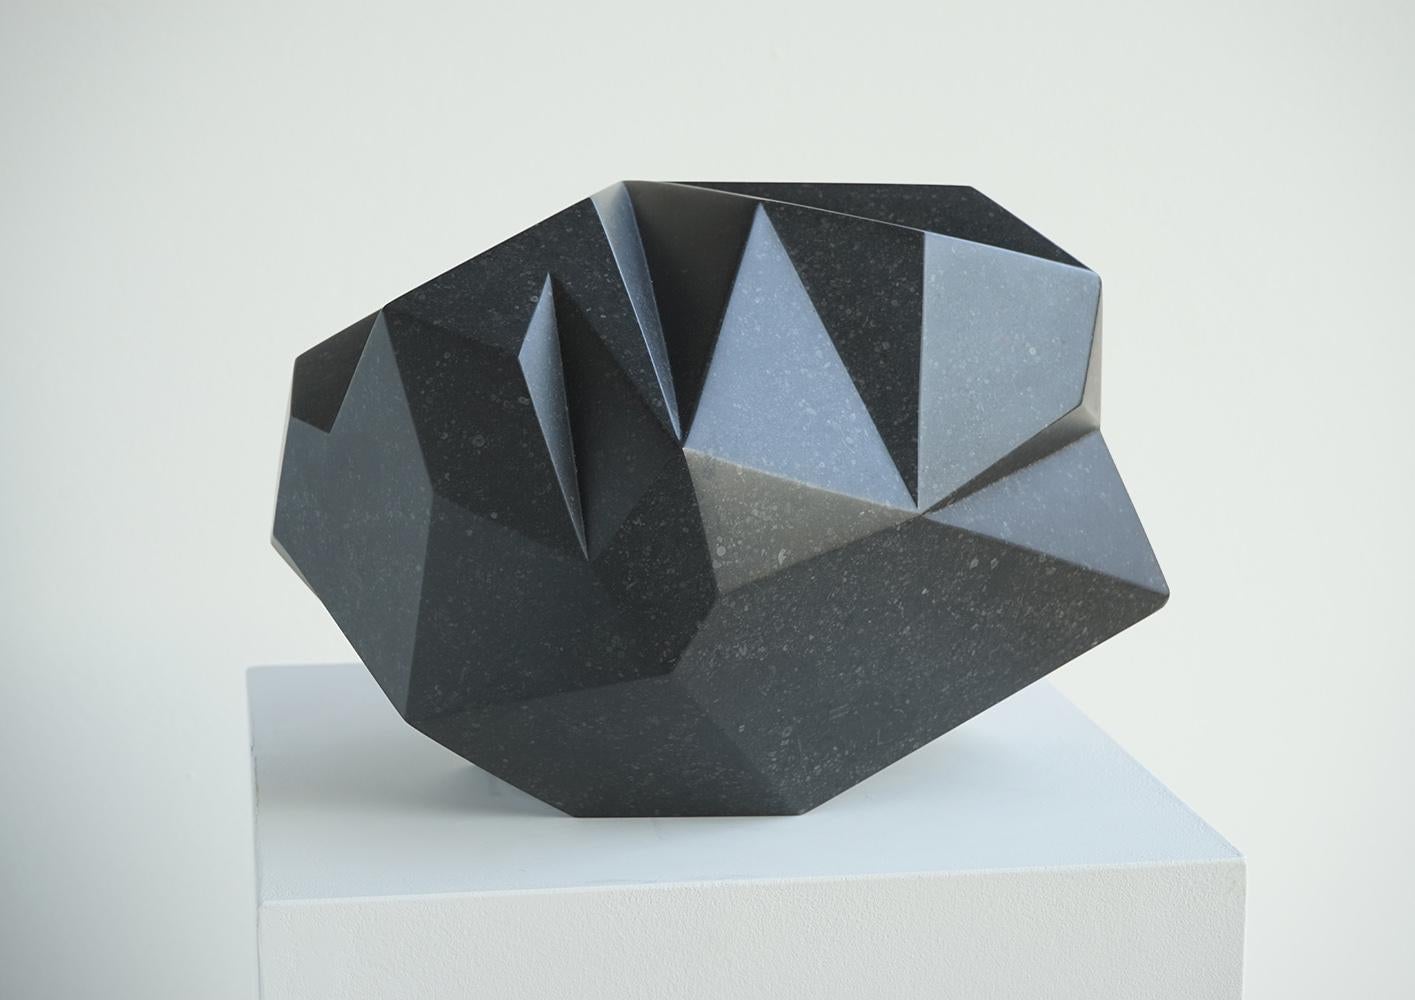 Halley 1 By Richard Perry - Abstract sculpture, Irish blue limestone, geometric For Sale 1